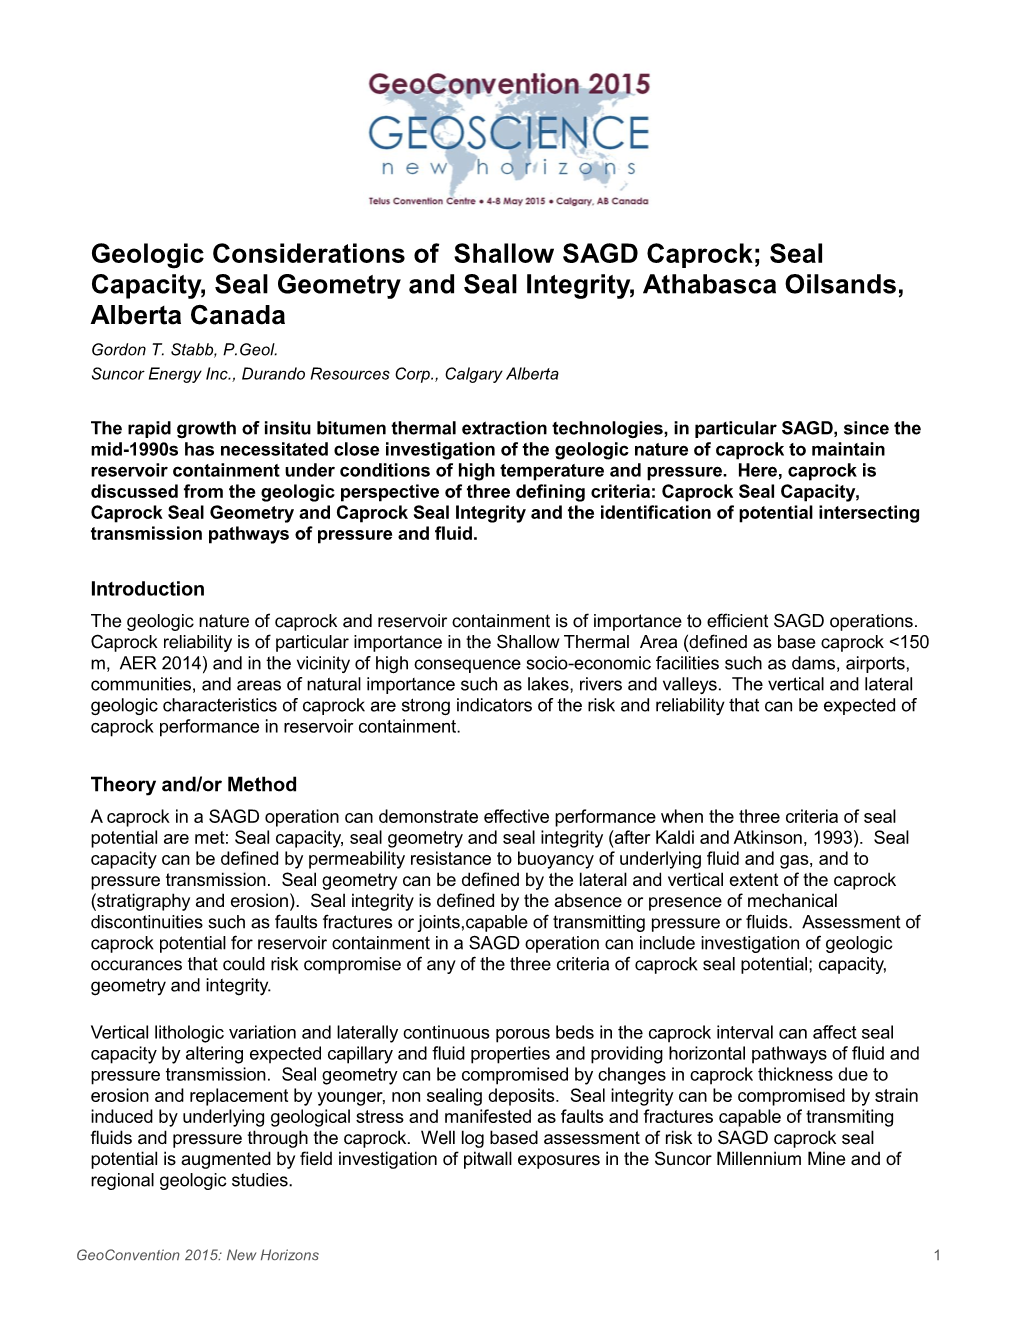 Geologic Considerations of Shallow SAGD Caprock; Seal Capacity, Seal Geometry and Seal Integrity, Athabasca Oilsands, Alberta Canada Gordon T